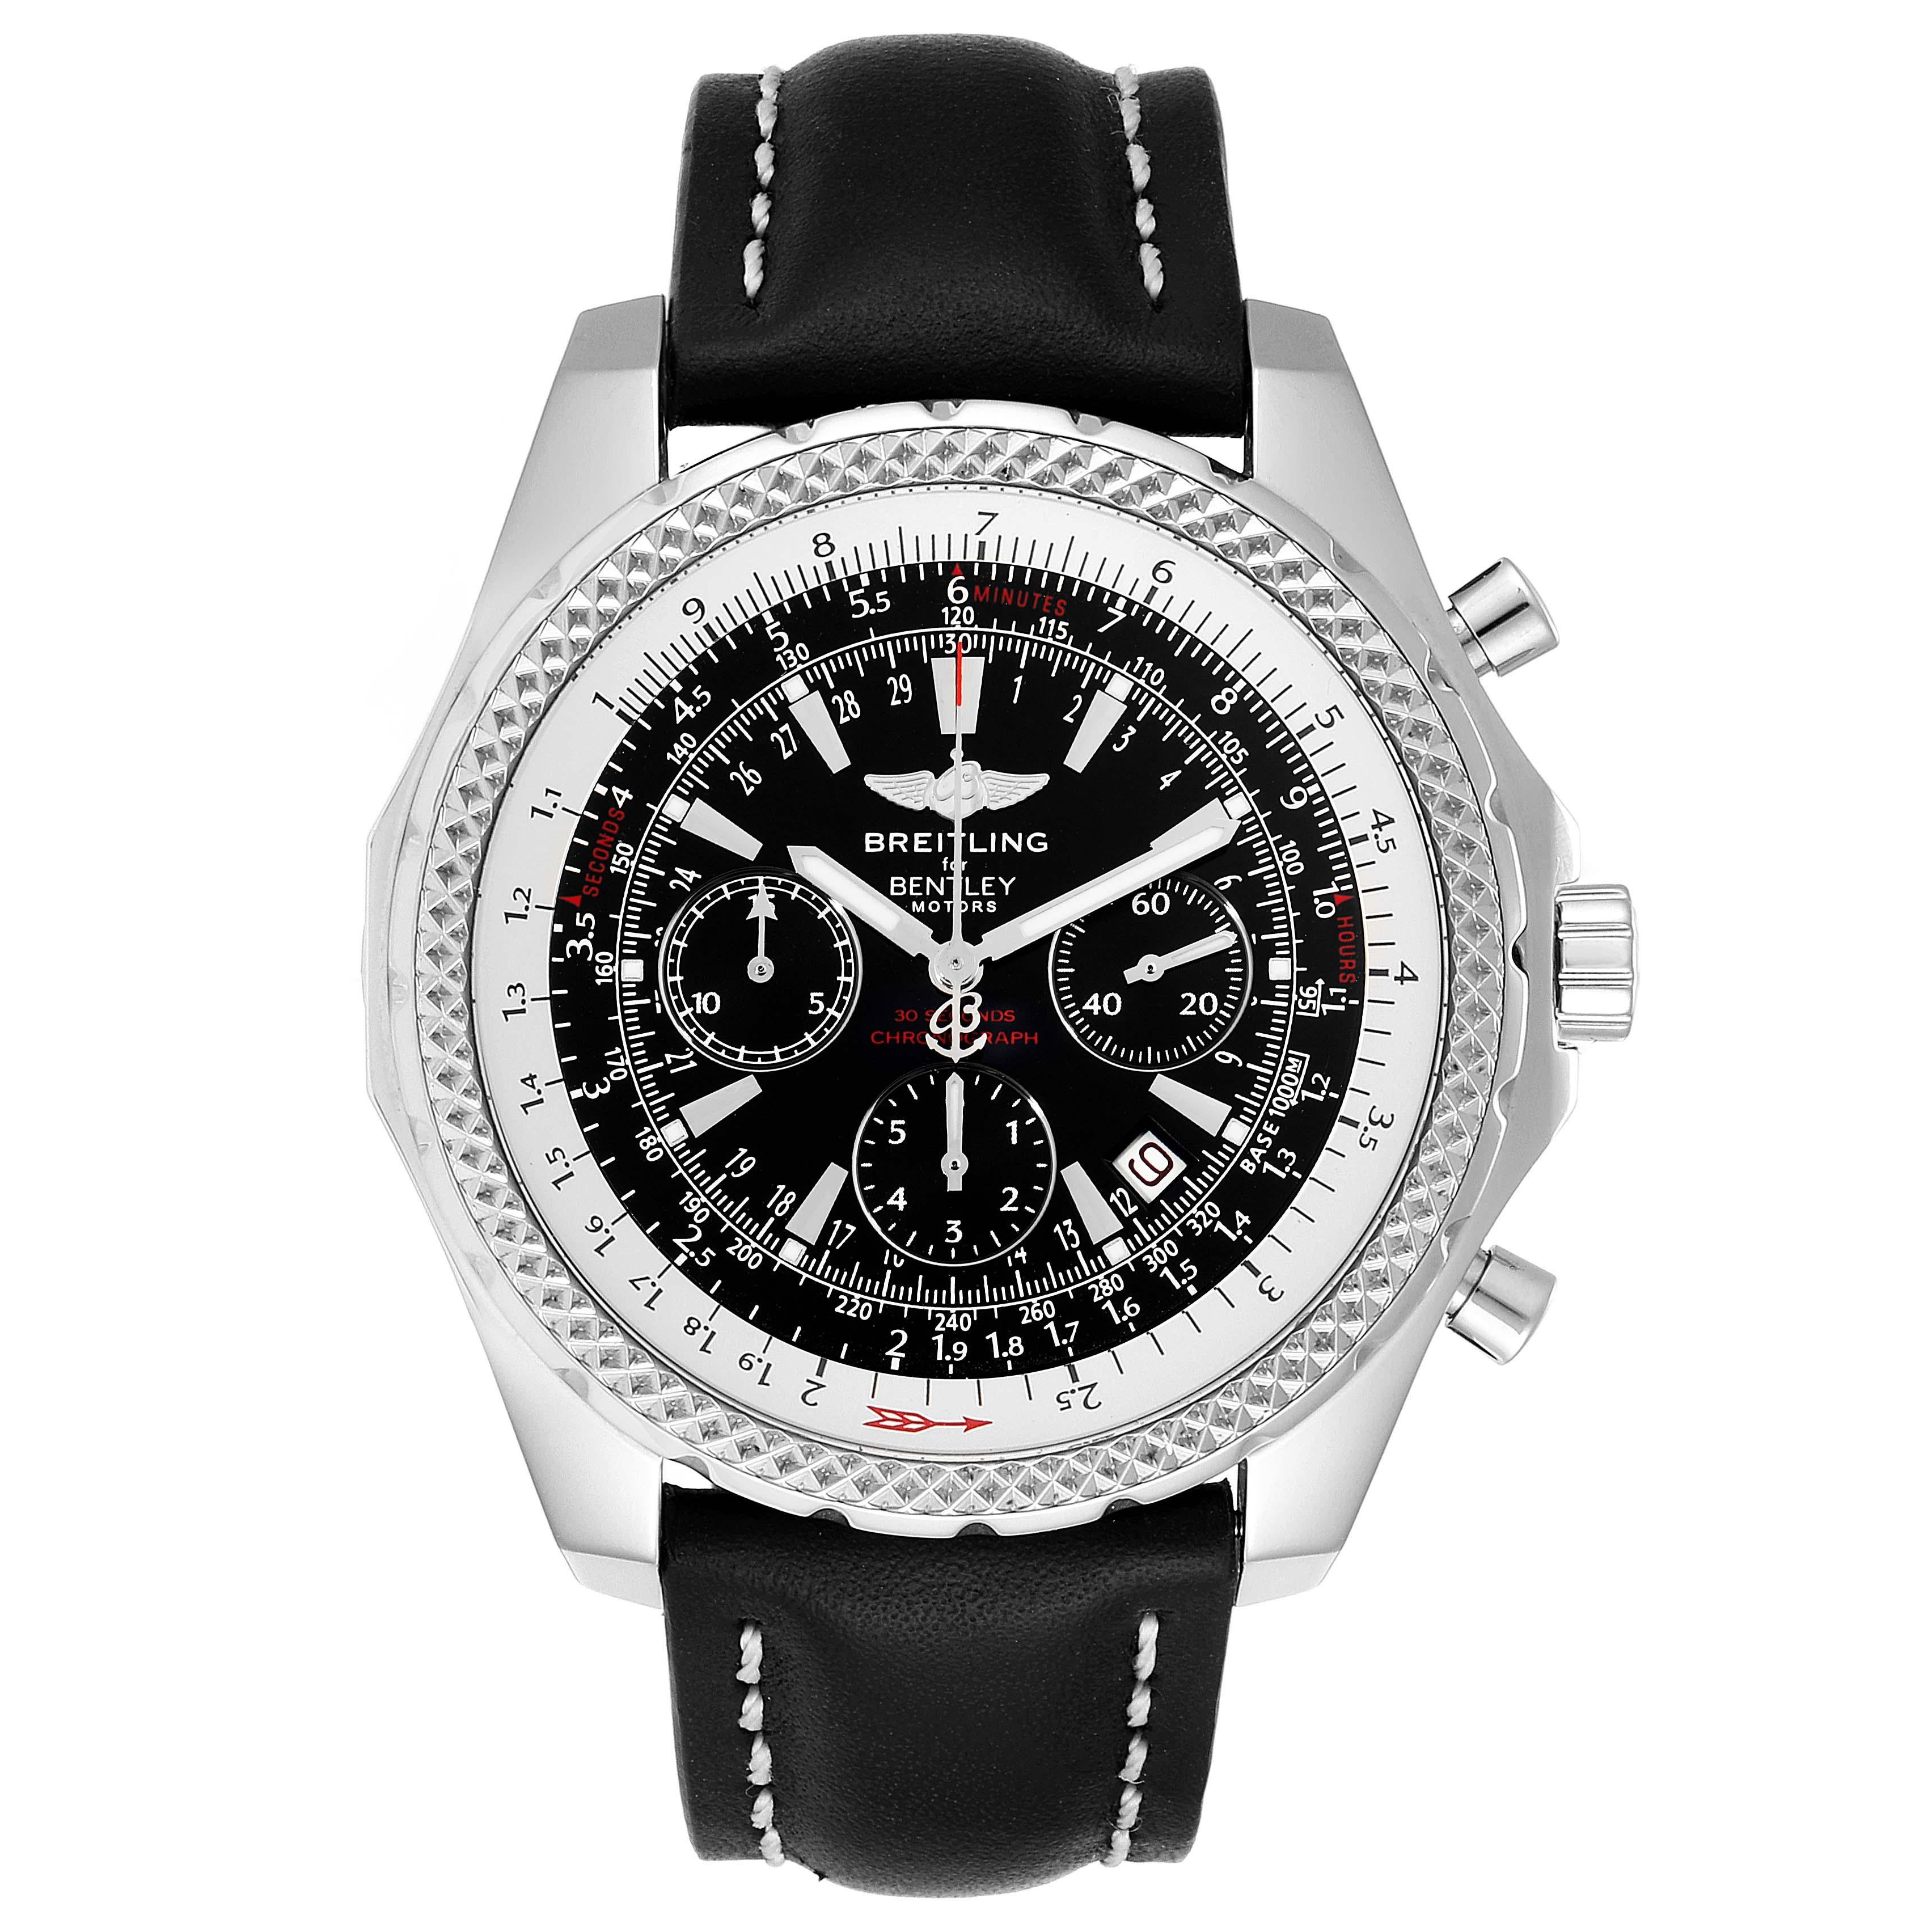 Breitling Bentley Black Dial Chronograph Steel Mens Watch A25362. Automatic self-winding officially certified chronometer movement. Chronograph function. Stainless steel case 49 mm in diameter. Stainless steel screwed-down crown and pushers. Screw